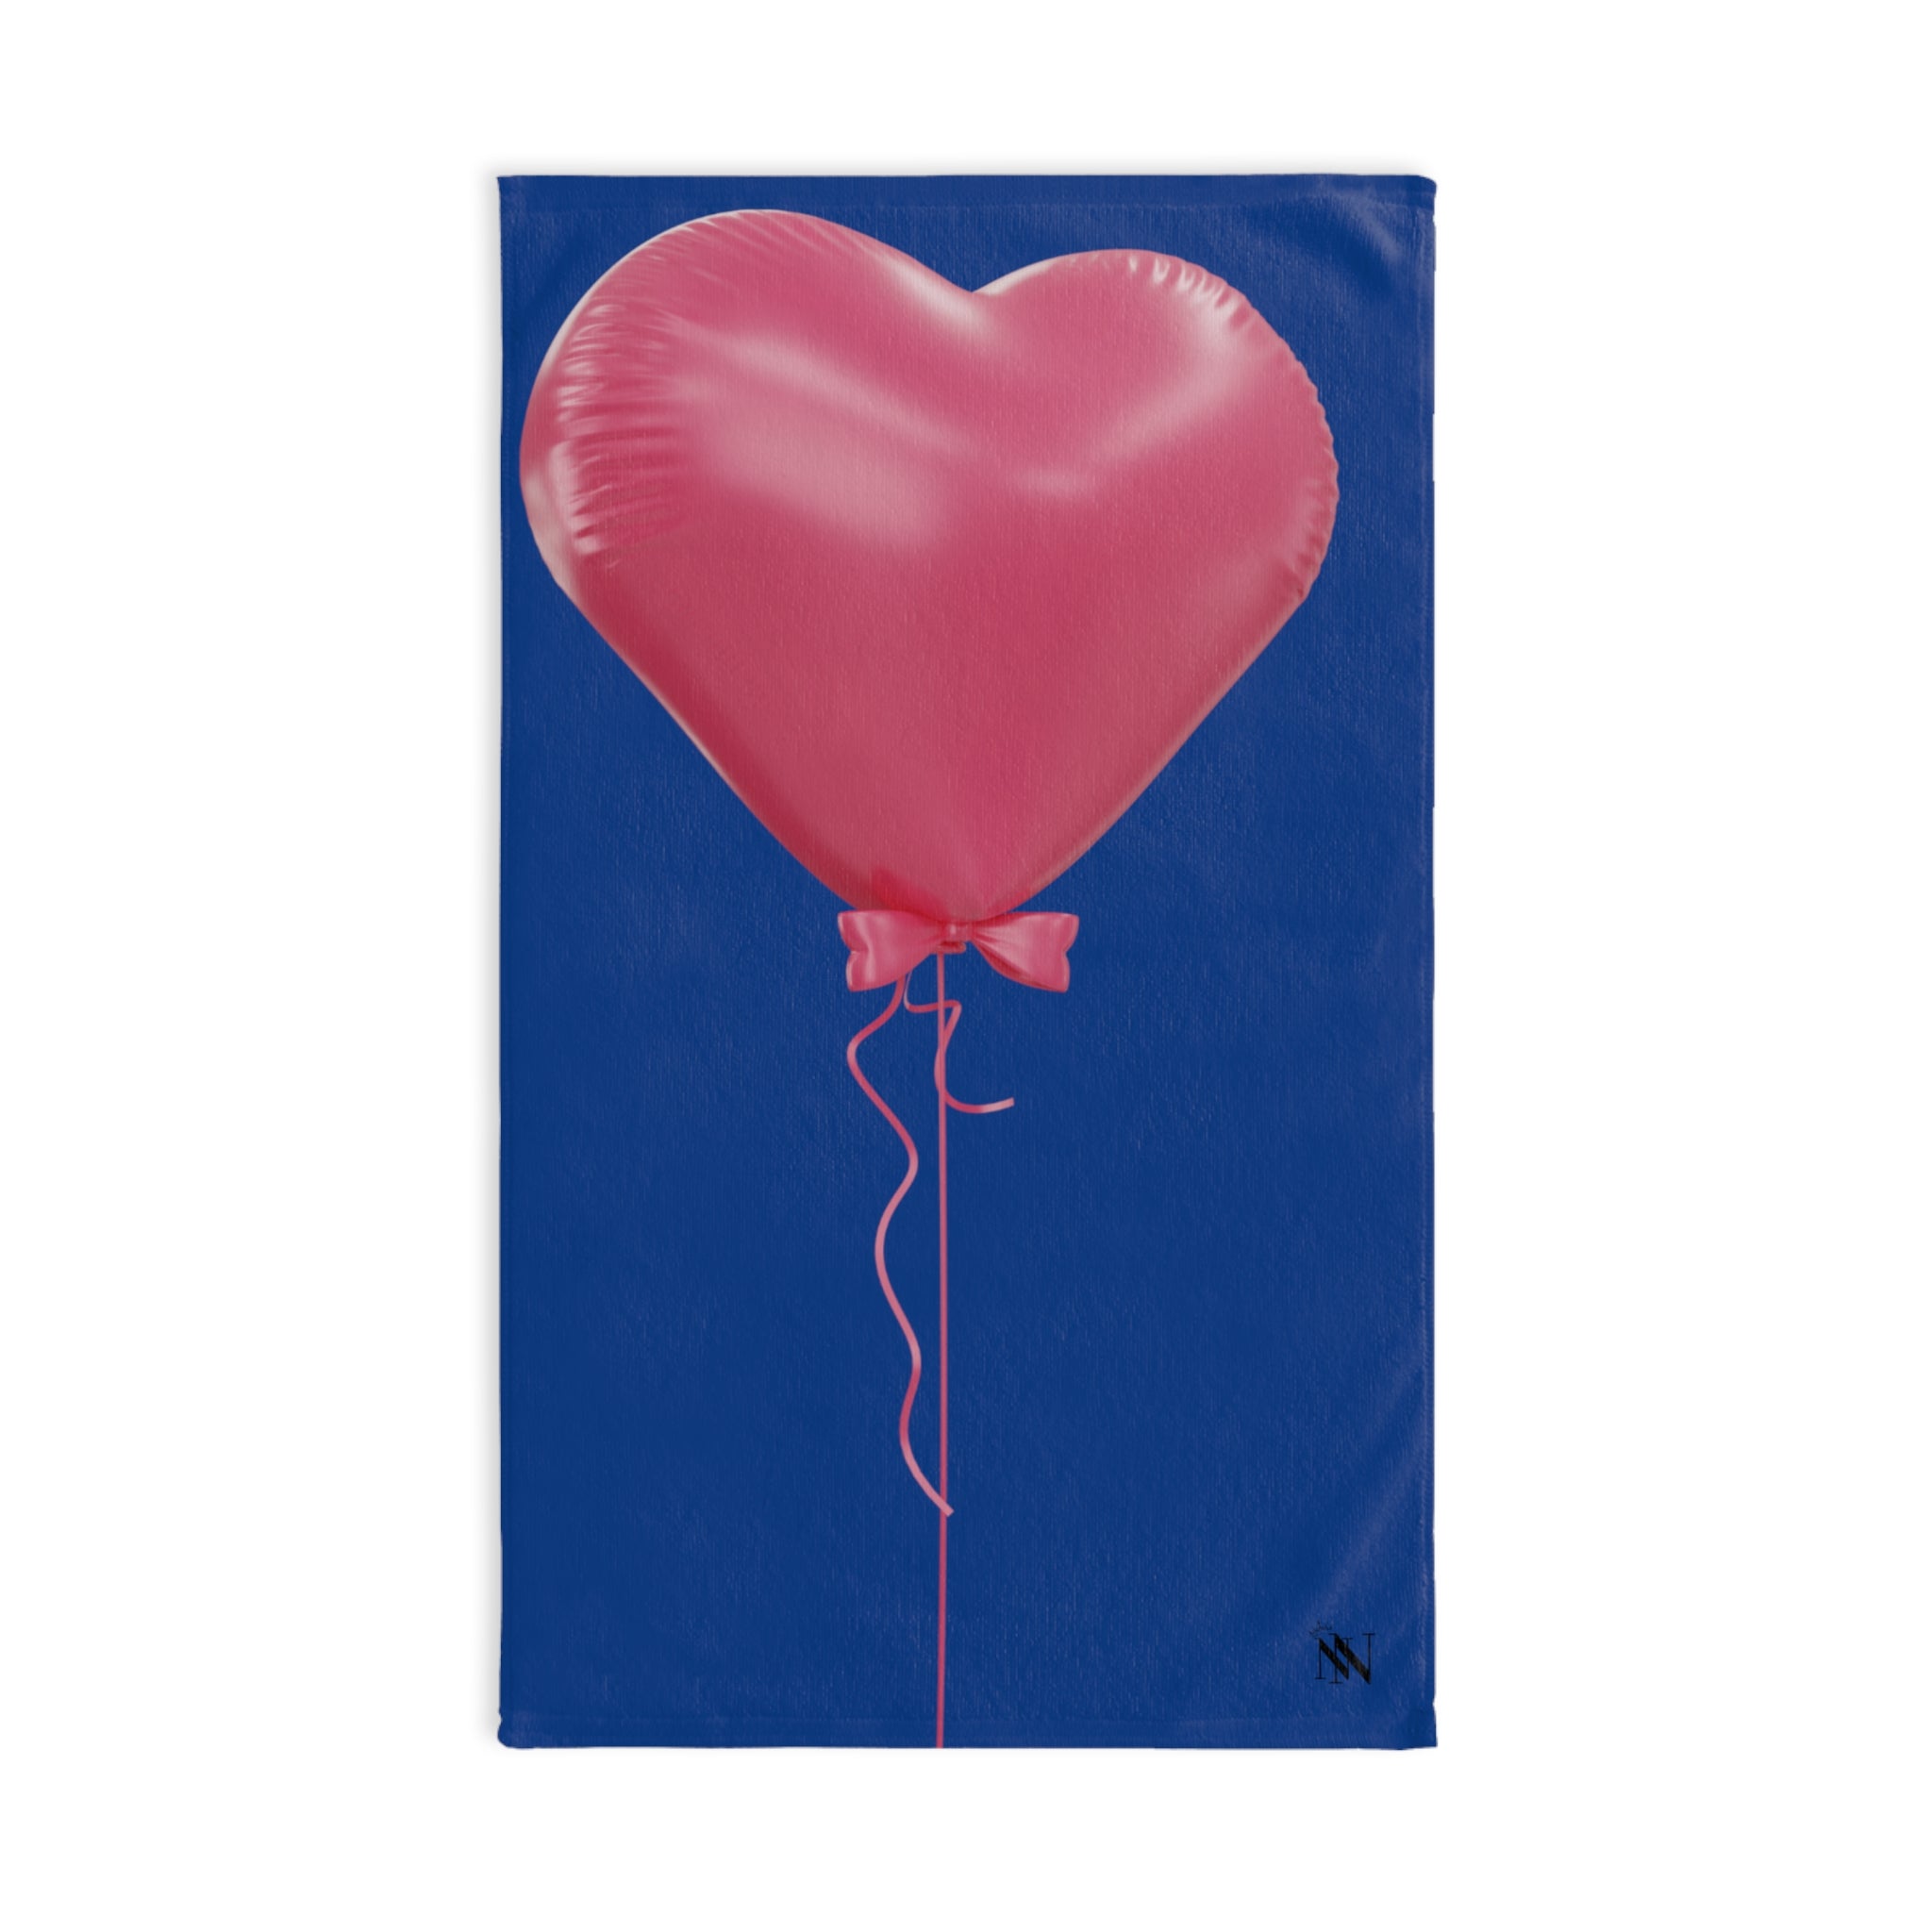 Pink 3D Heart Balloon Blue | Gifts for Boyfriend, Funny Towel Romantic Gift for Wedding Couple Fiance First Year Anniversary Valentines, Party Gag Gifts, Joke Humor Cloth for Husband Men BF NECTAR NAPKINS